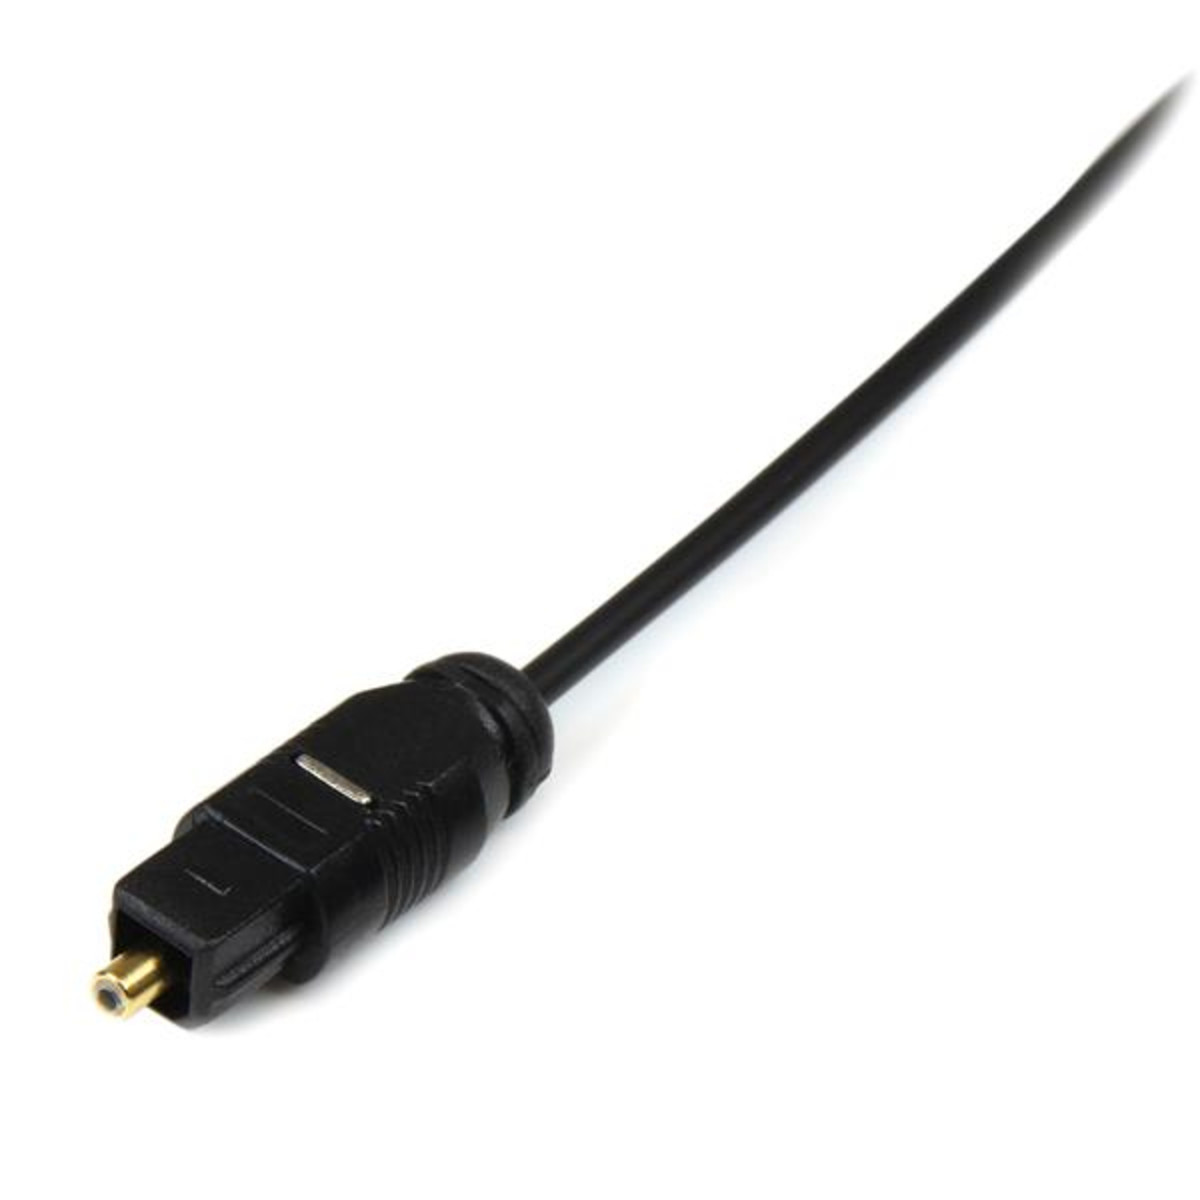 15 ft Thin Toslink Digital Optical Cable